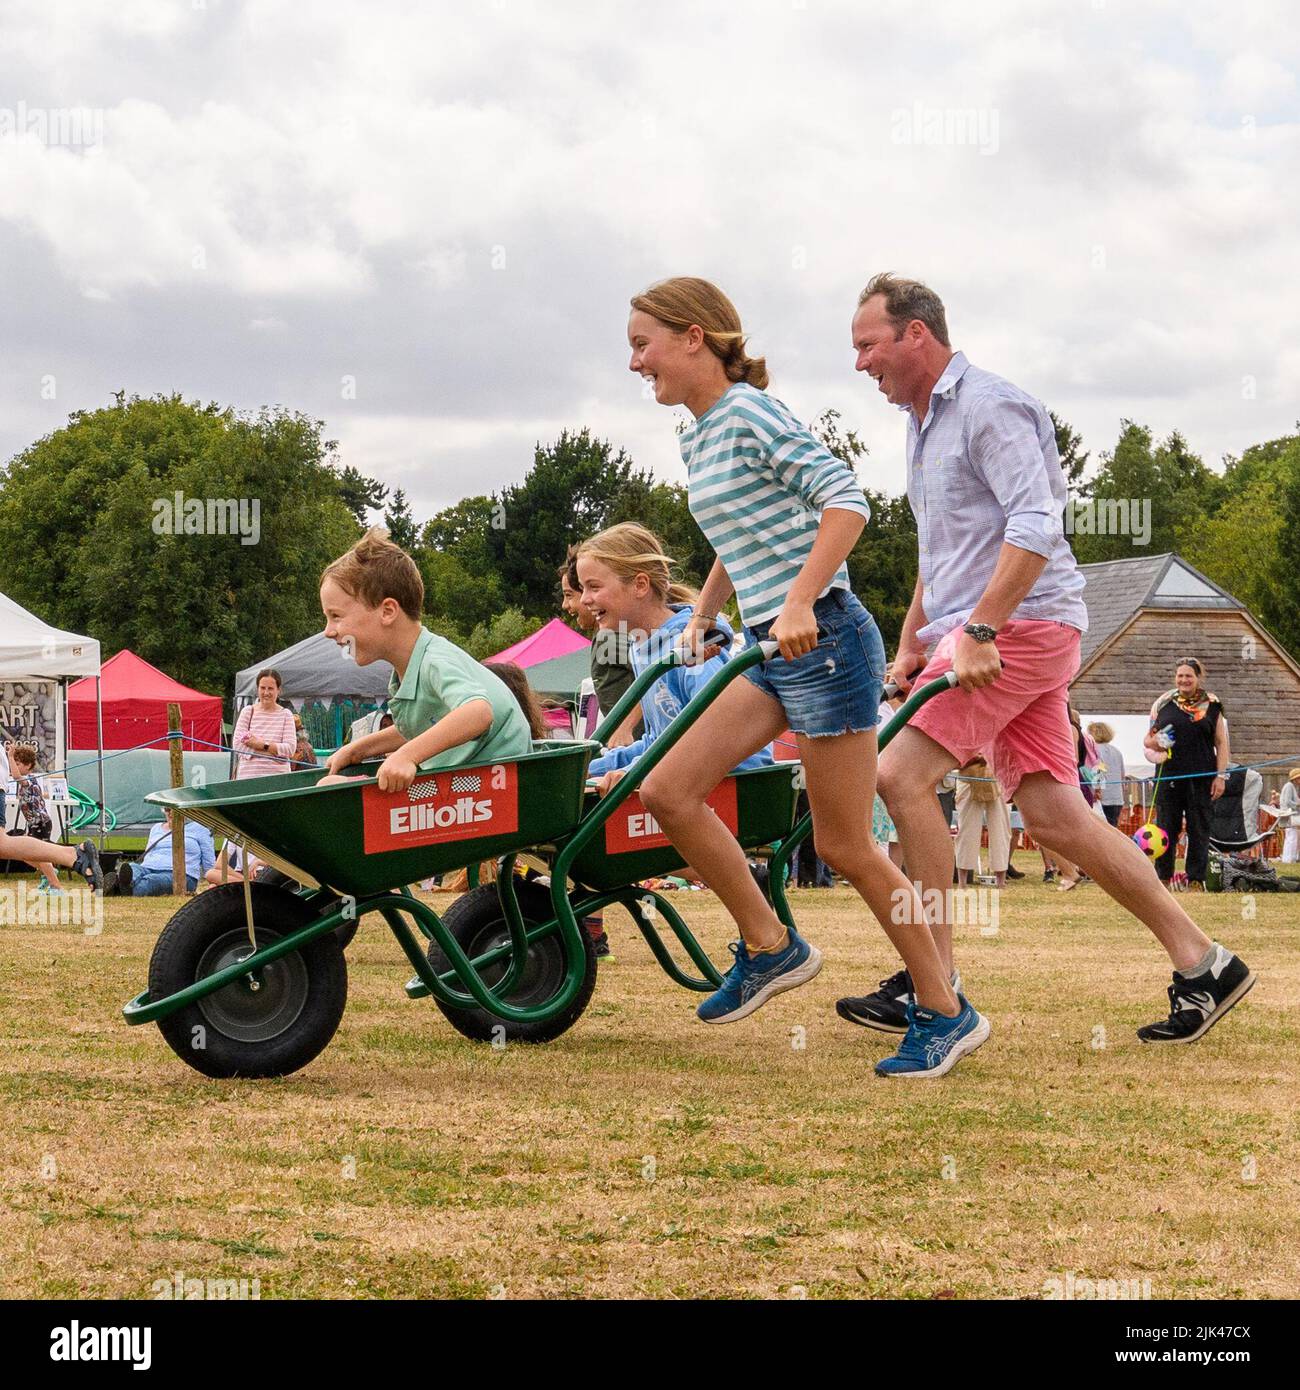 Damerham near Fordingbridge, Hampshire, UK, 30th July 2022. Family fun for competitors in the wheelbarrow racing at the Damerham Fair and Horticultural Show. Paul Biggins/Alamy Live News Stock Photo